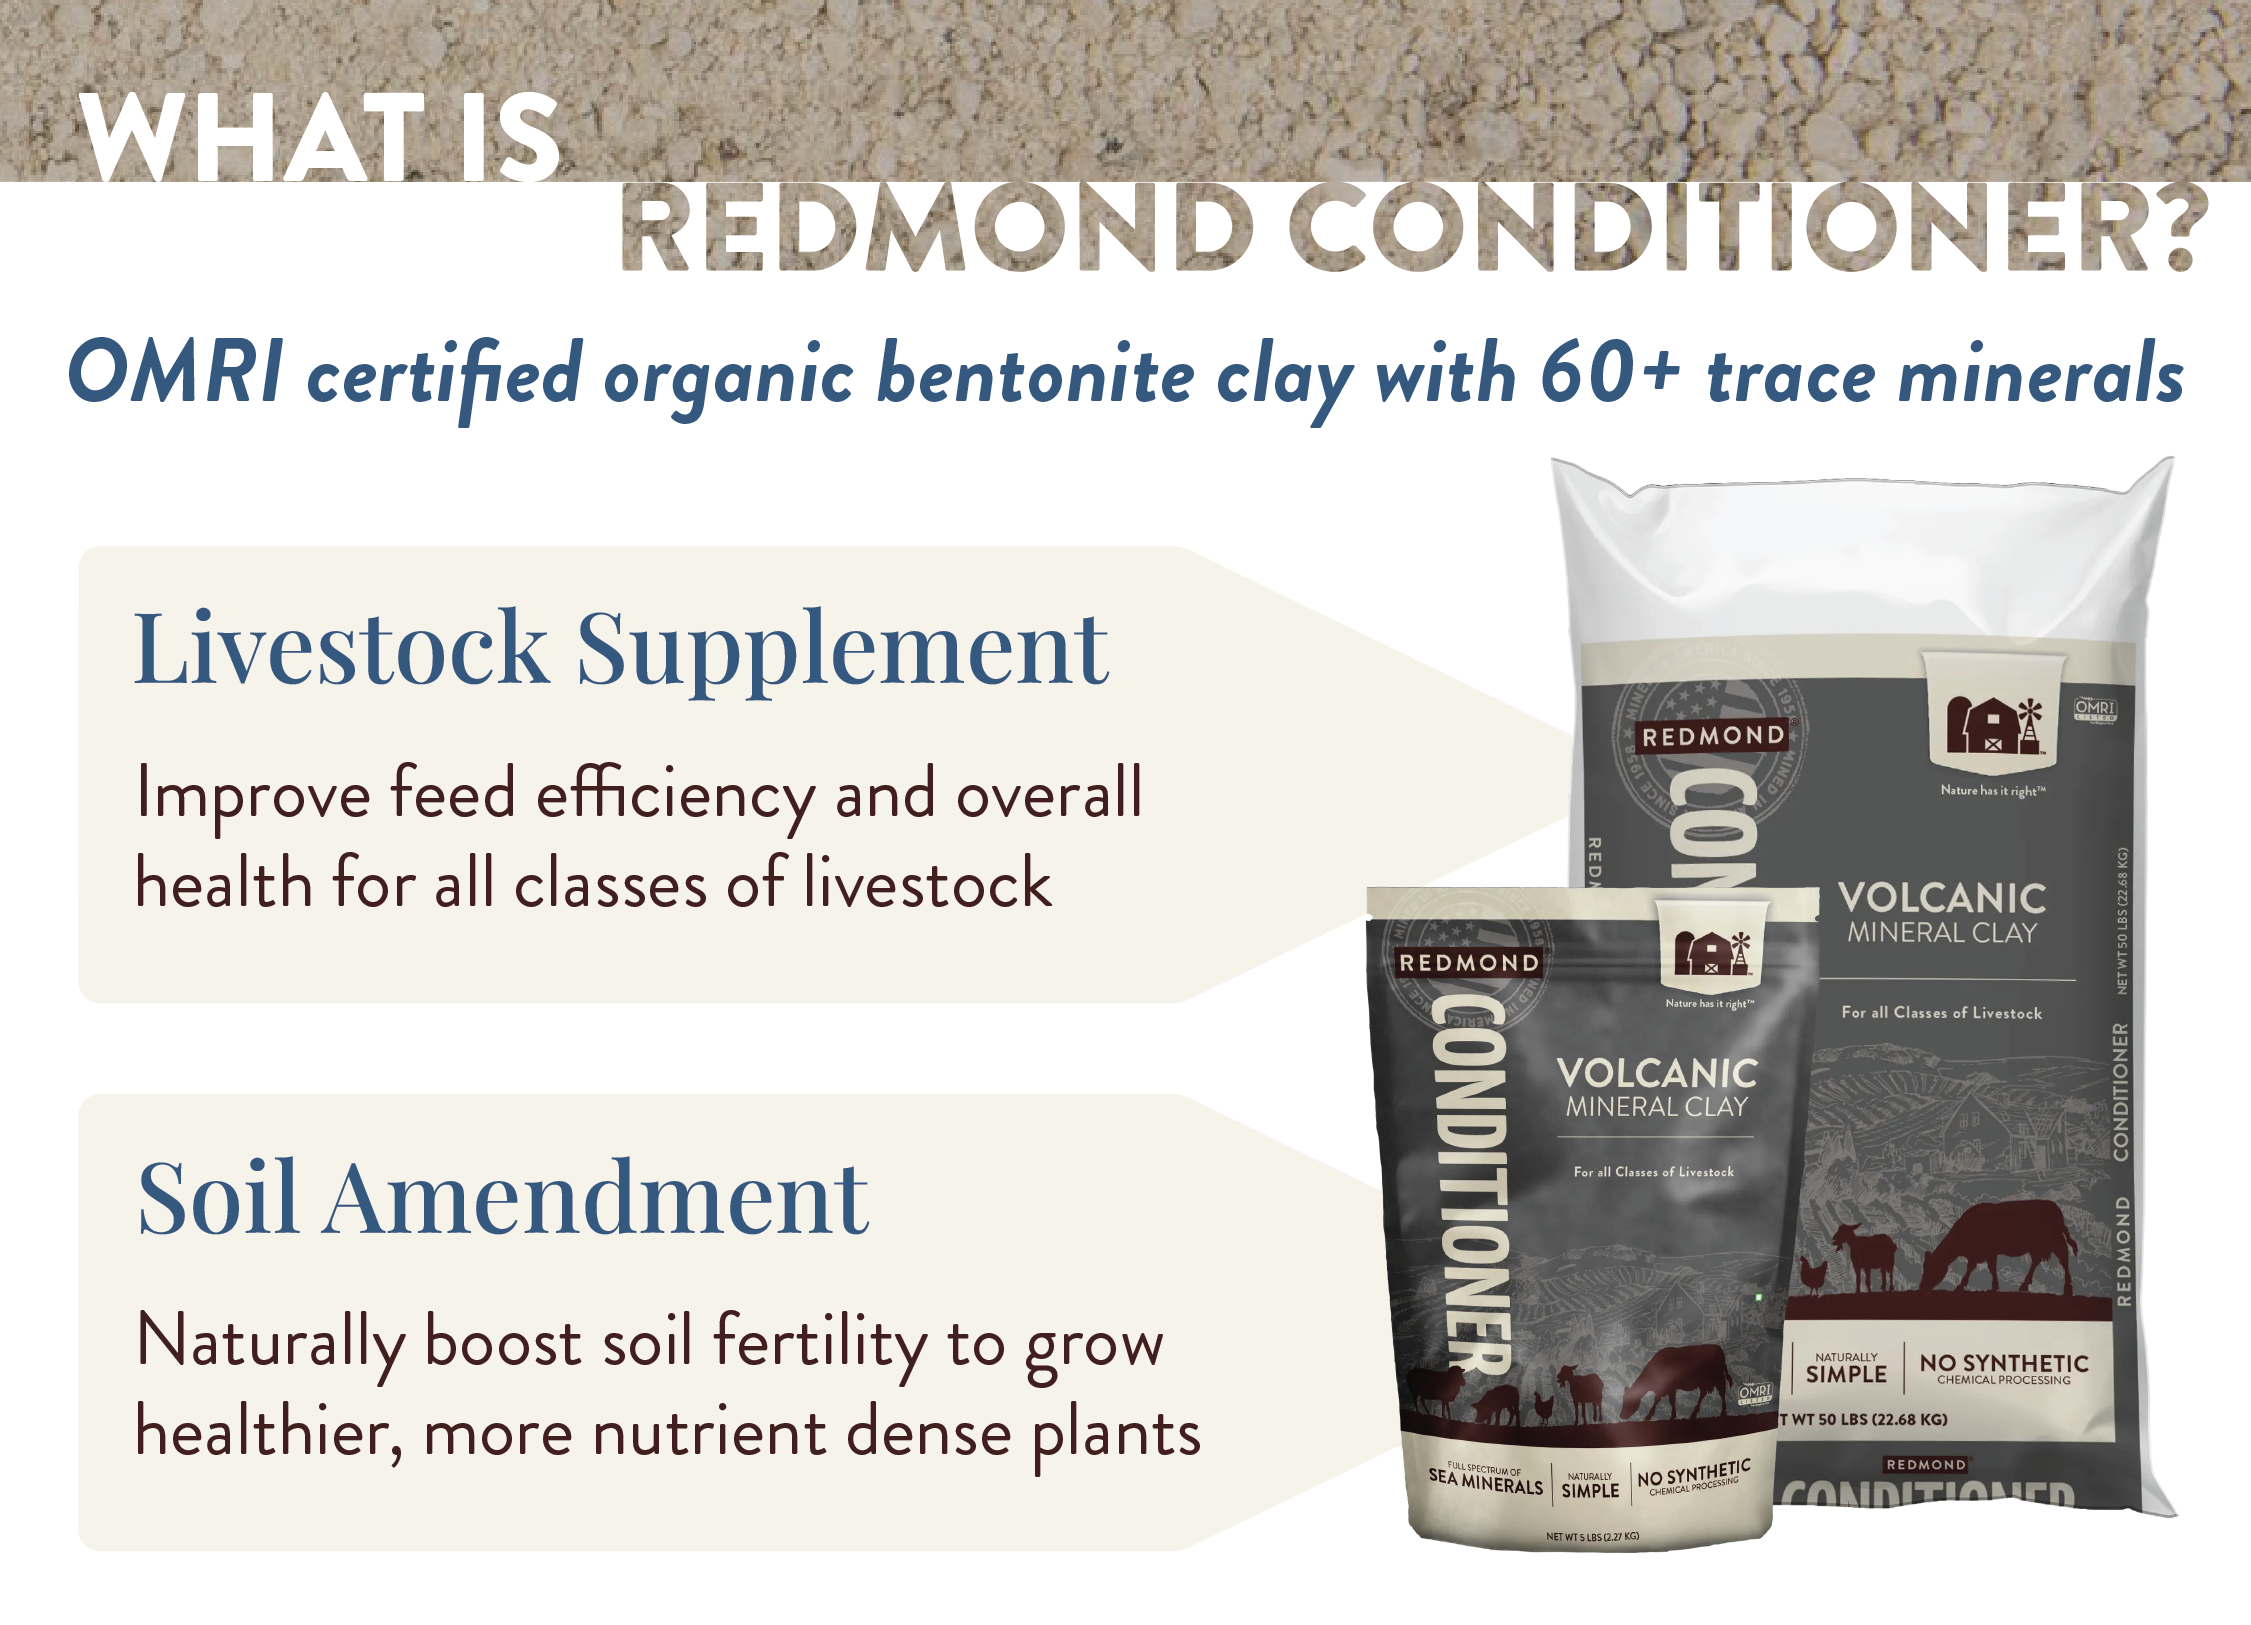 Bentonite clay for soil and livestock